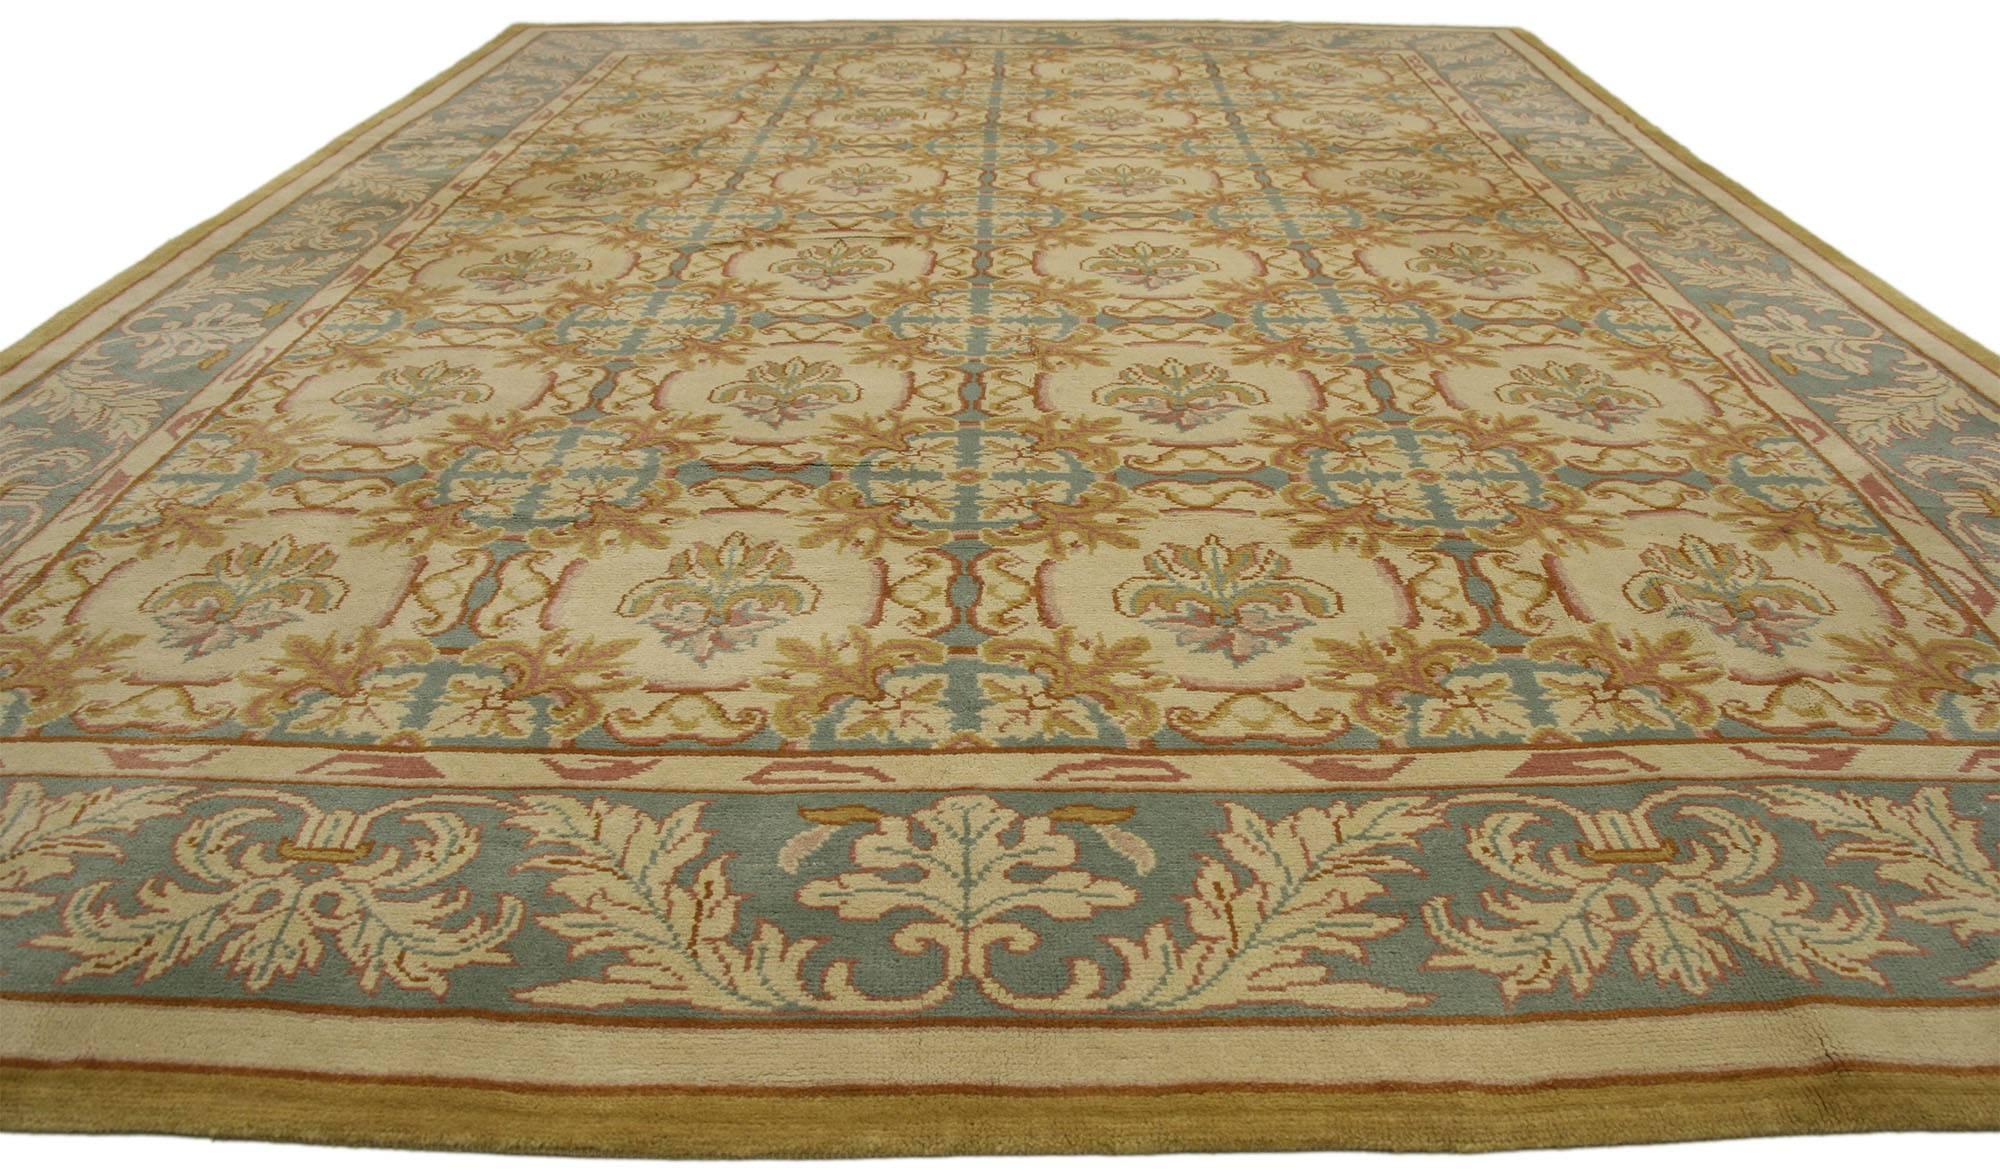 77121 Vintage Turkish Oushak Rug with Neoclassical European Style and Soft Colors. This hand knotted wool vintage Turkish Oushak rug features an all-over trellis pattern composed of offset rows of rounded floral motifs spread across an abrashed